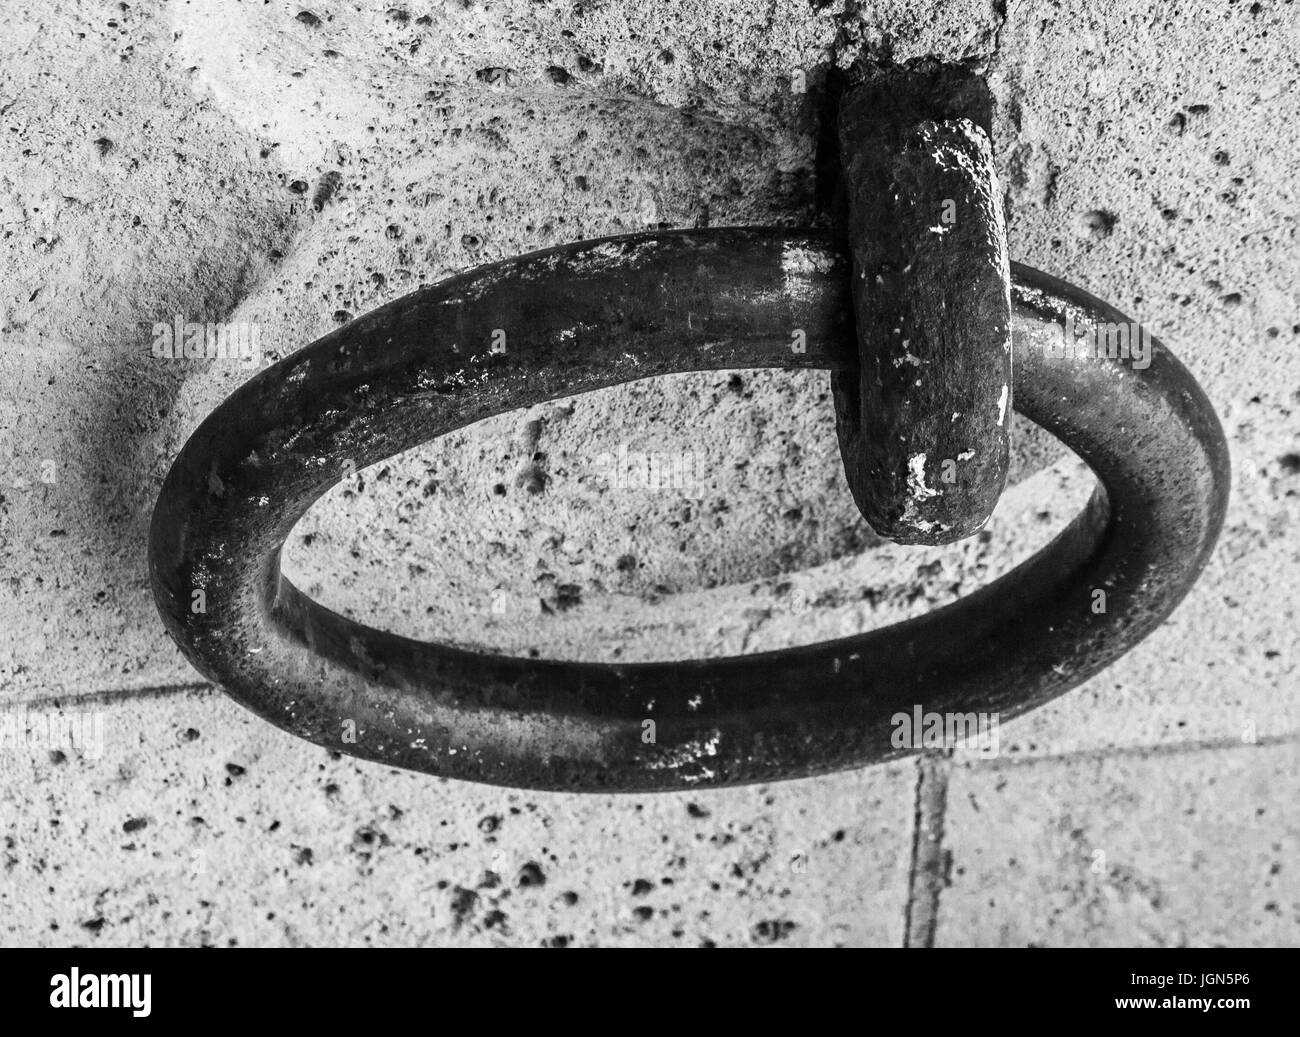 PARIS, FRANCE – 21 SEPTEMBER 2012: Steel ring for mooring on the waterfront of the River Seine in Paris. 21 September, 2012. Paris, France Stock Photo